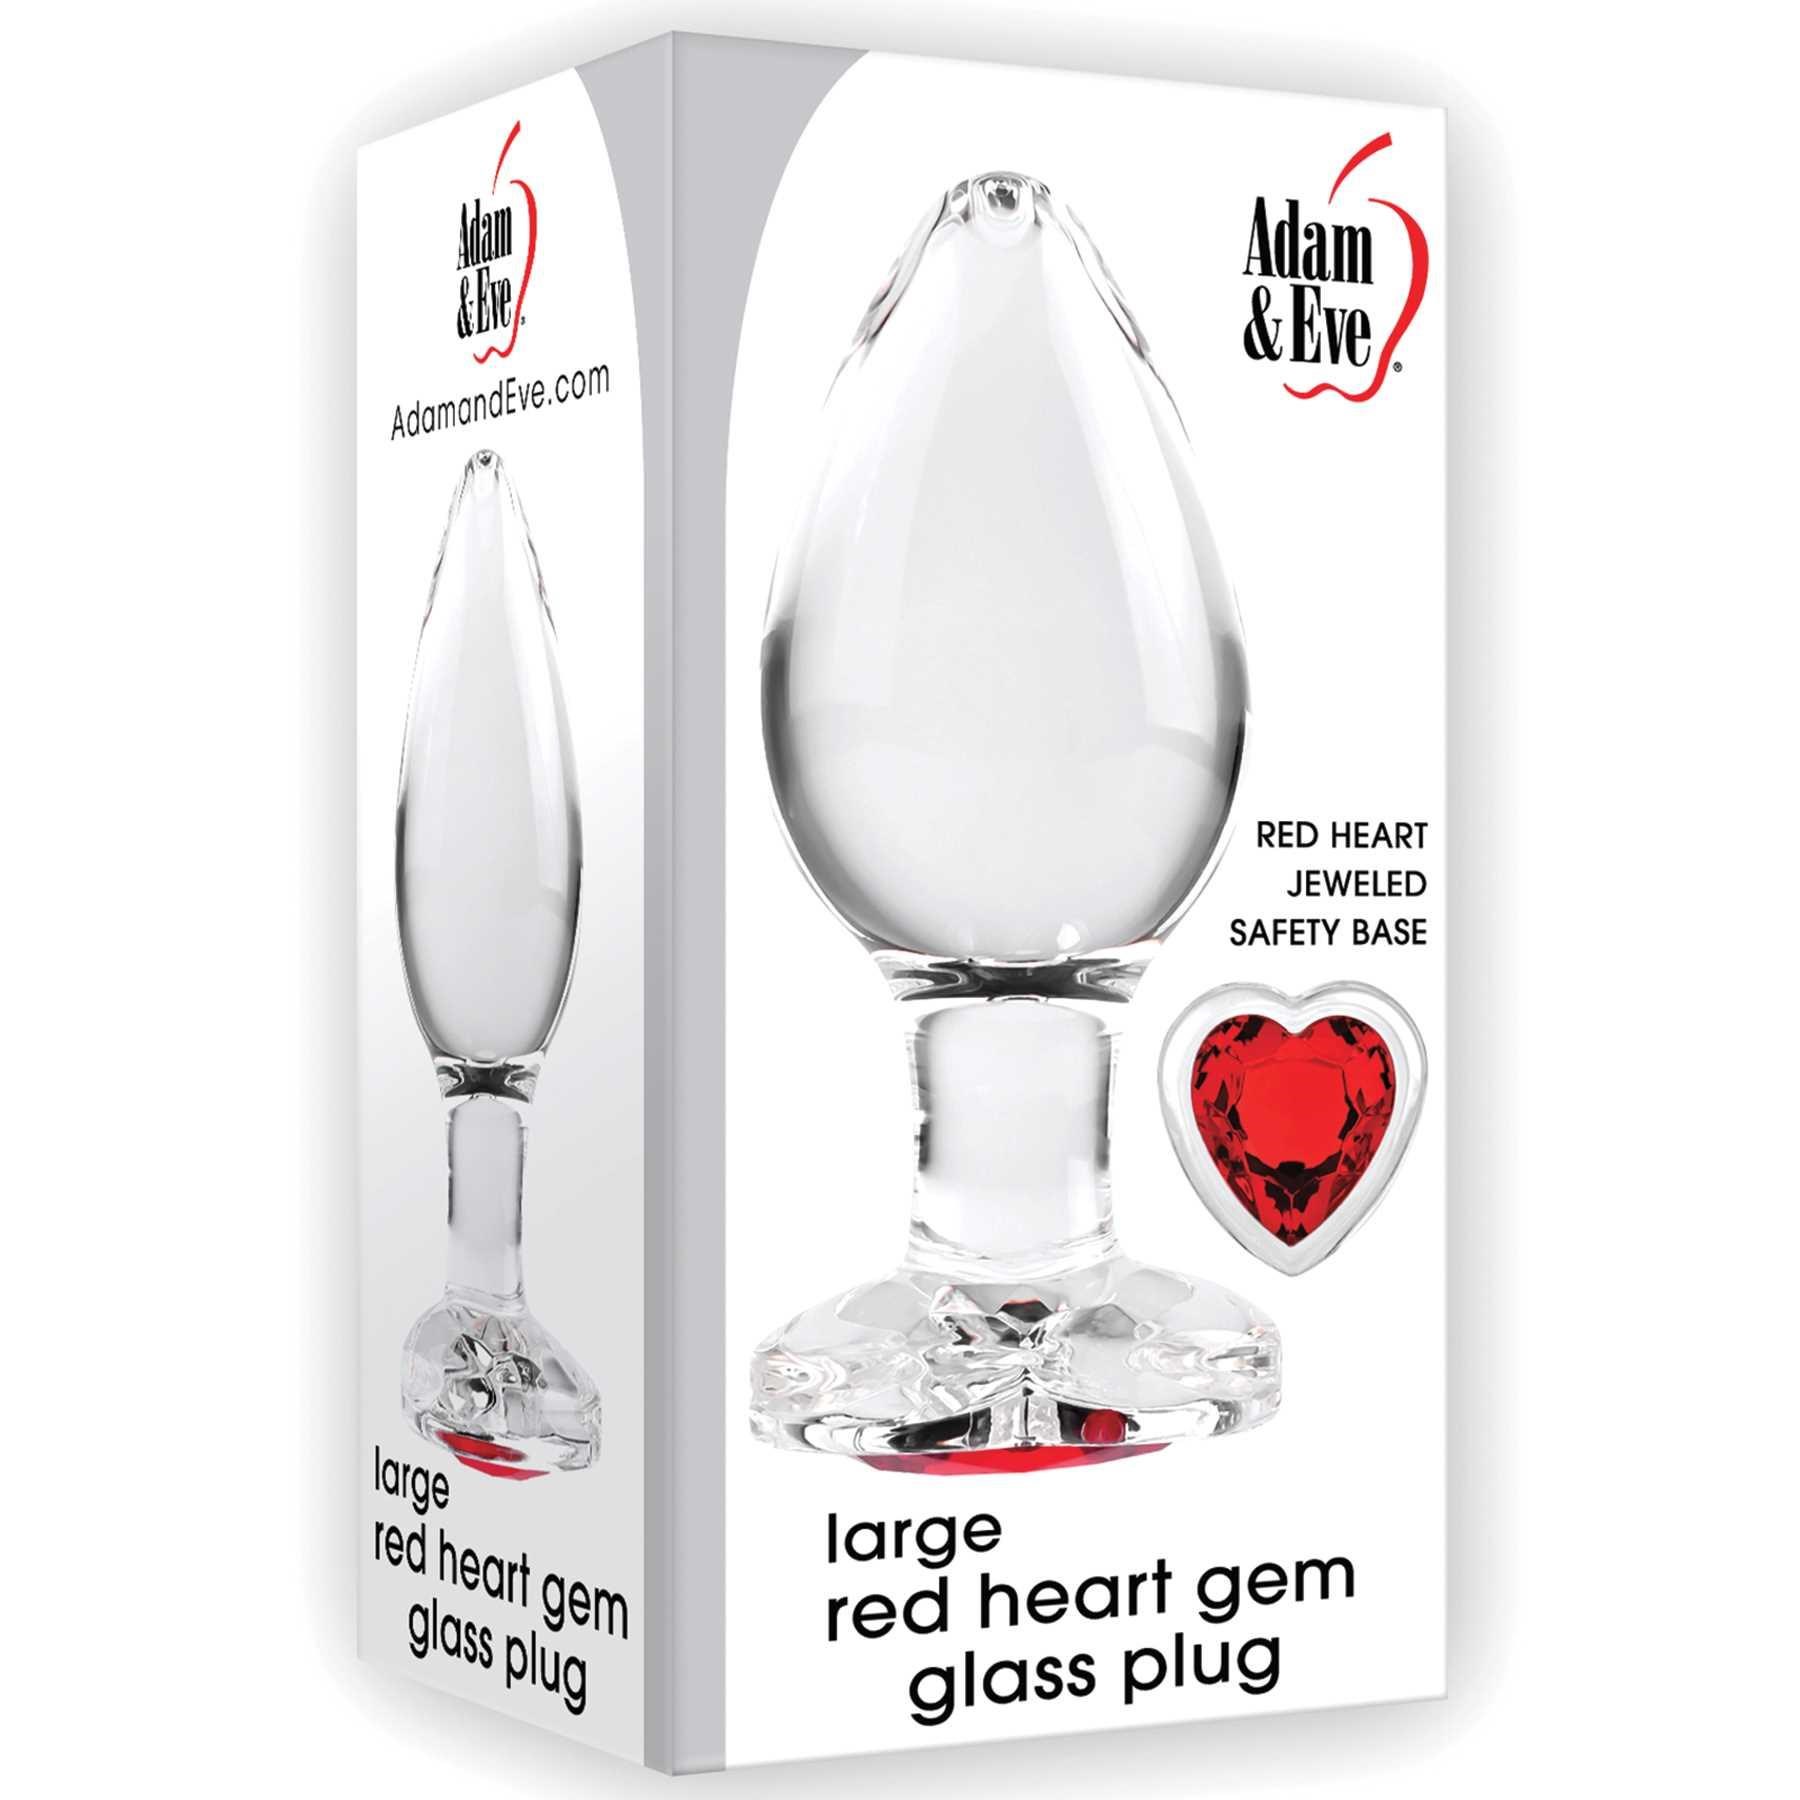 Red Heart Gem Glass Plug large box packaging